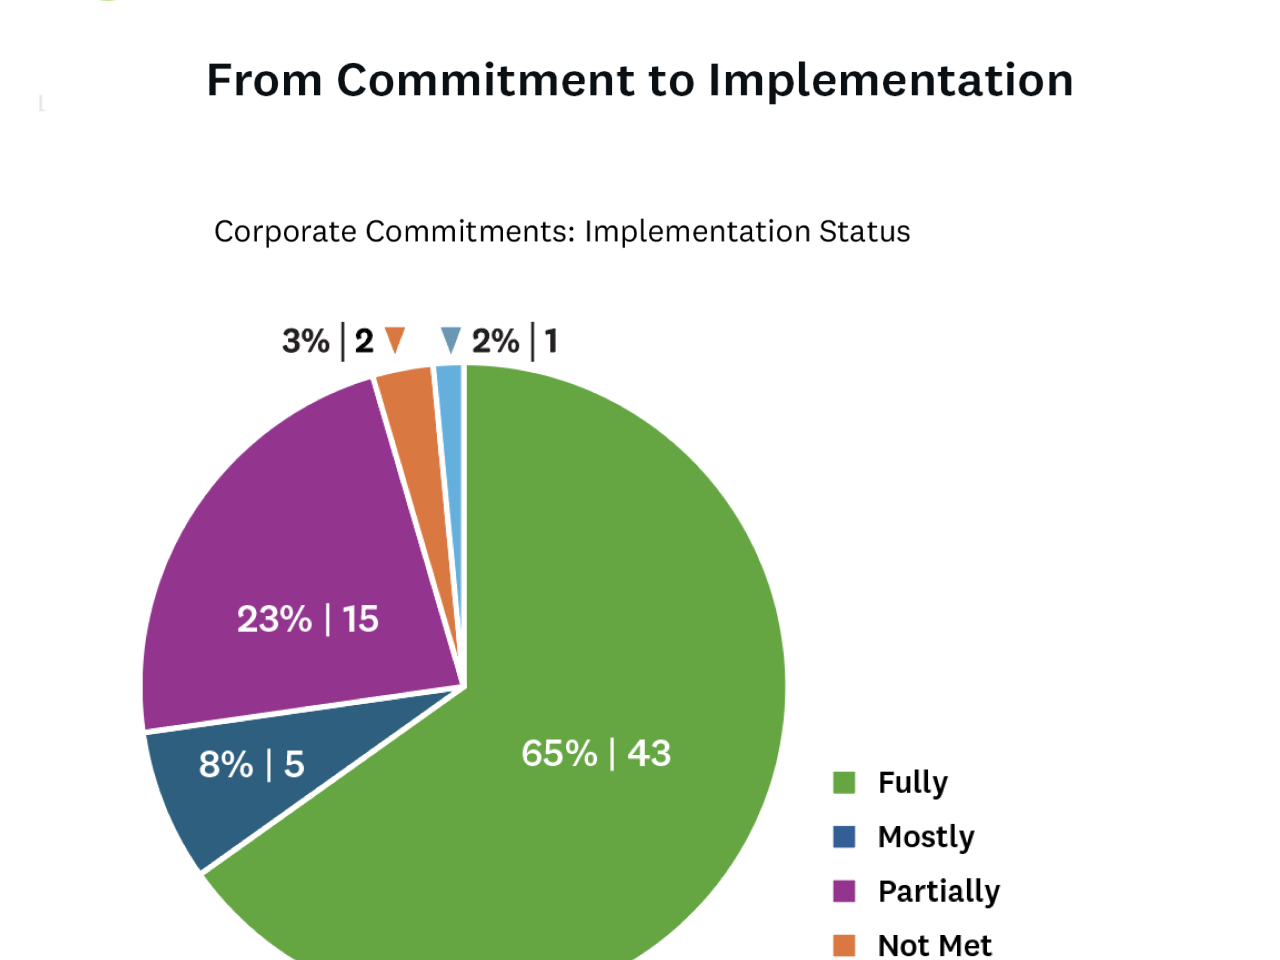 Corporate Commitments: Implementation Status